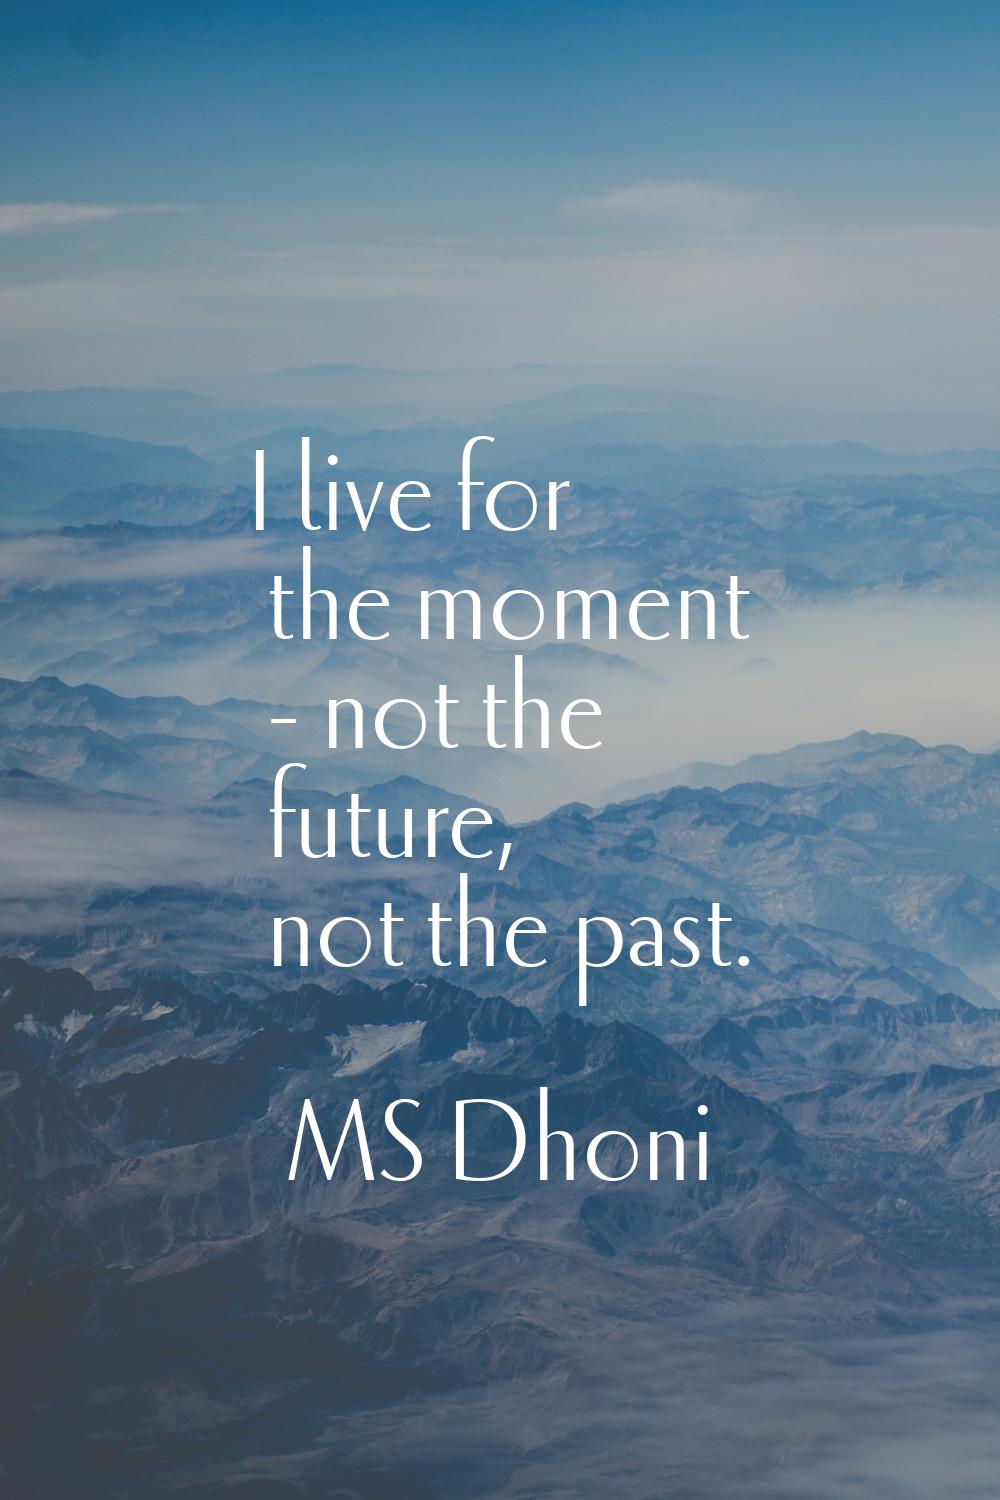 I live for the moment - not the future, not the past.